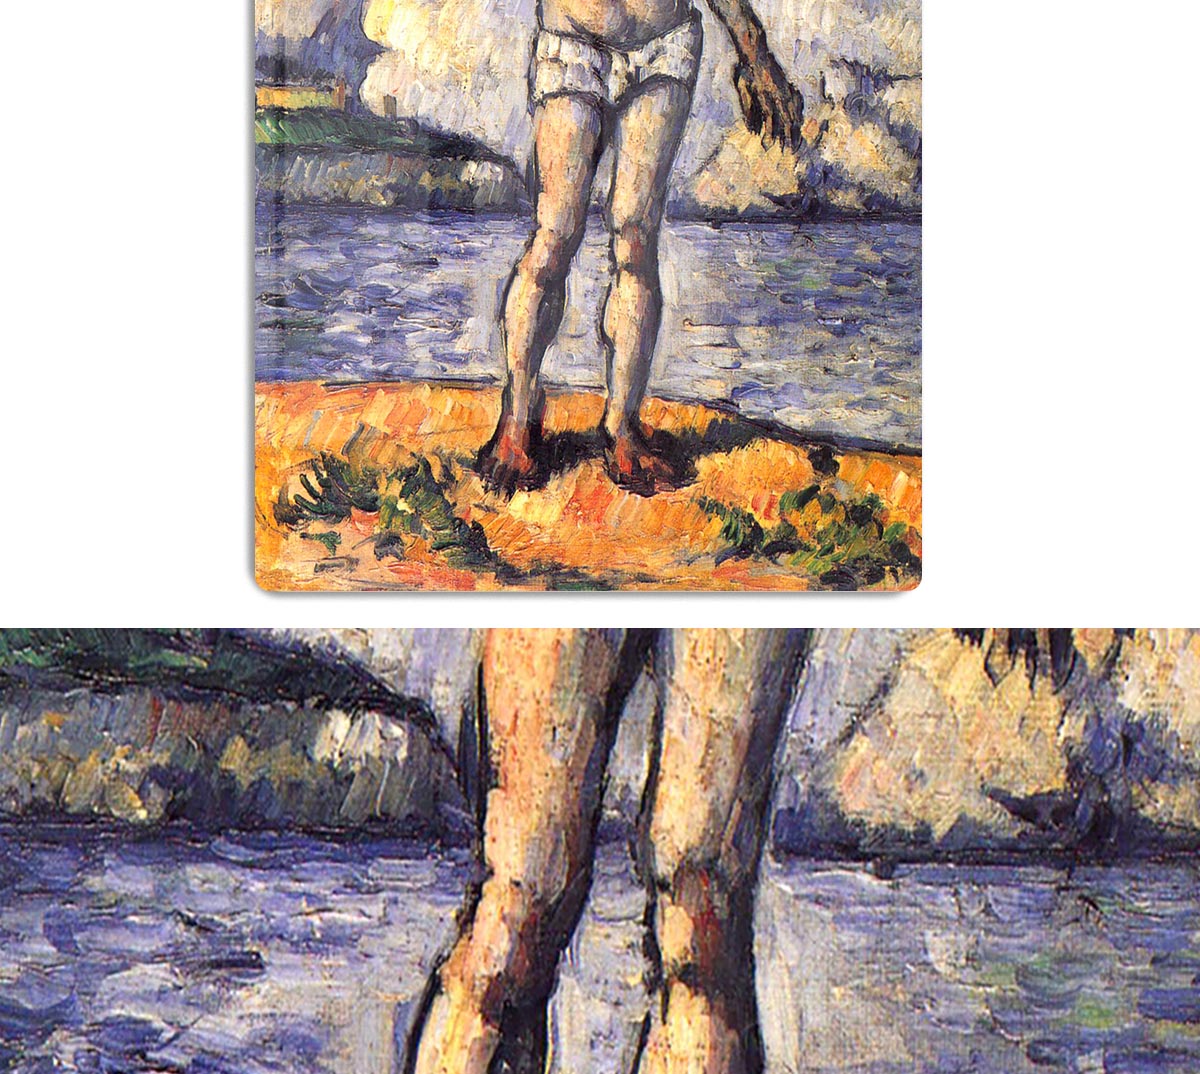 Swimmer with outstretched arms by Cezanne Acrylic Block - Canvas Art Rocks - 1